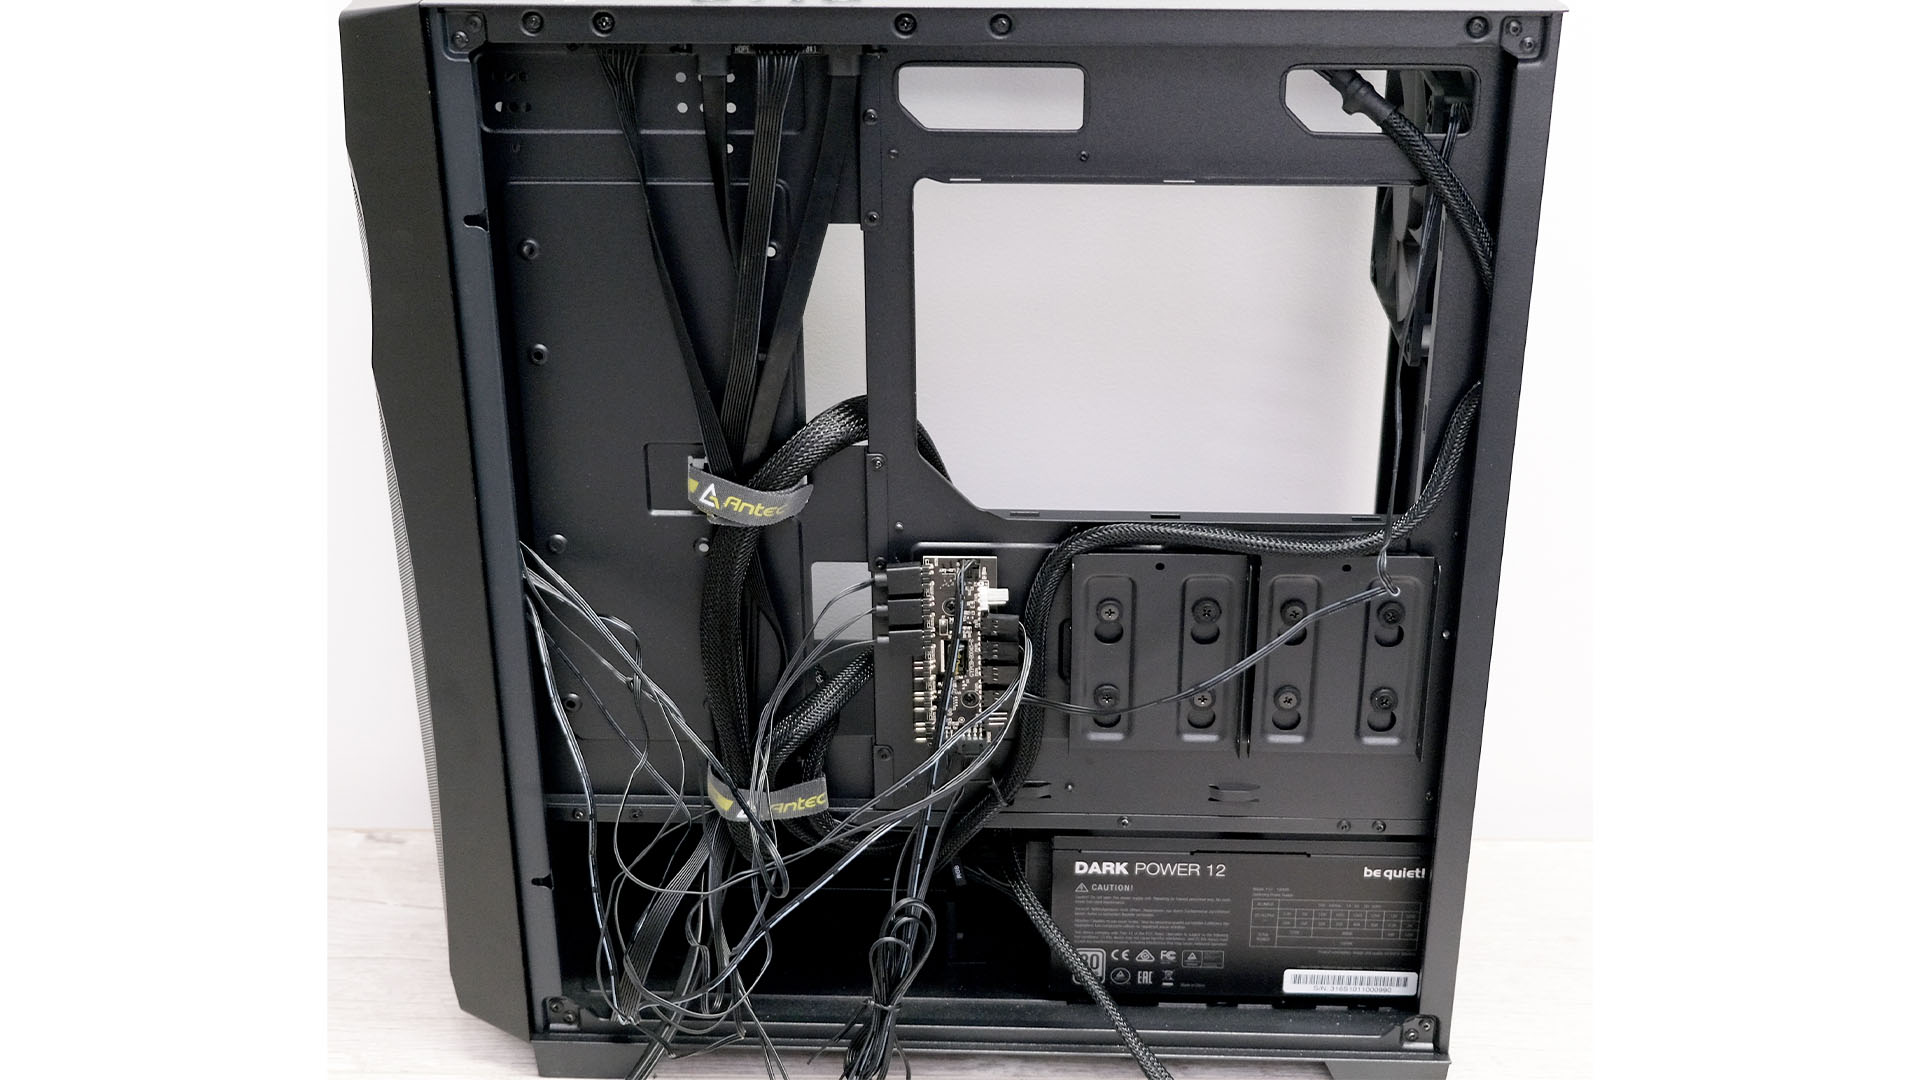 Cable management guide: Start with main PC cables